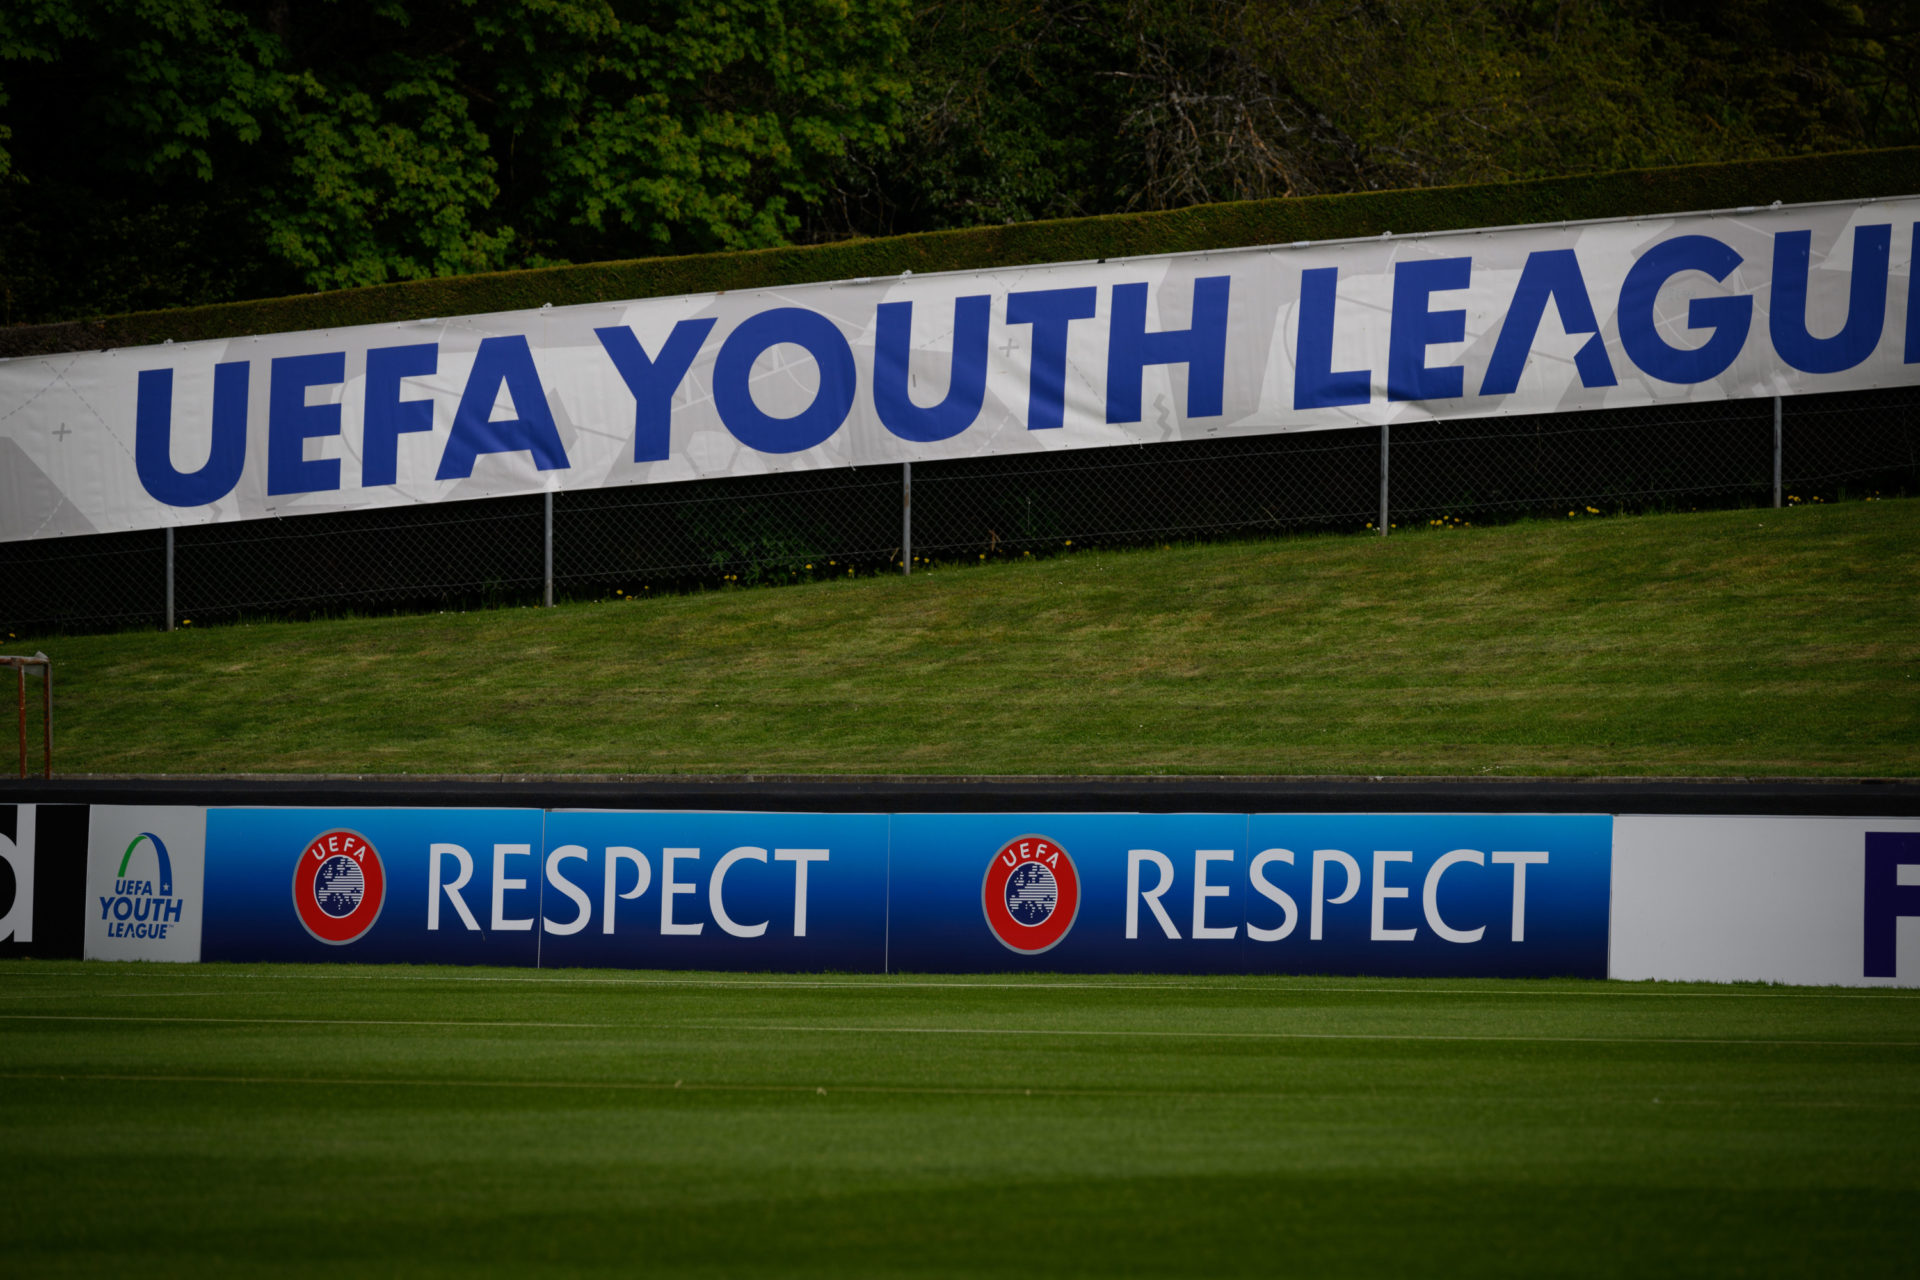 UEFA Youth League 2021/22 Finals Previews